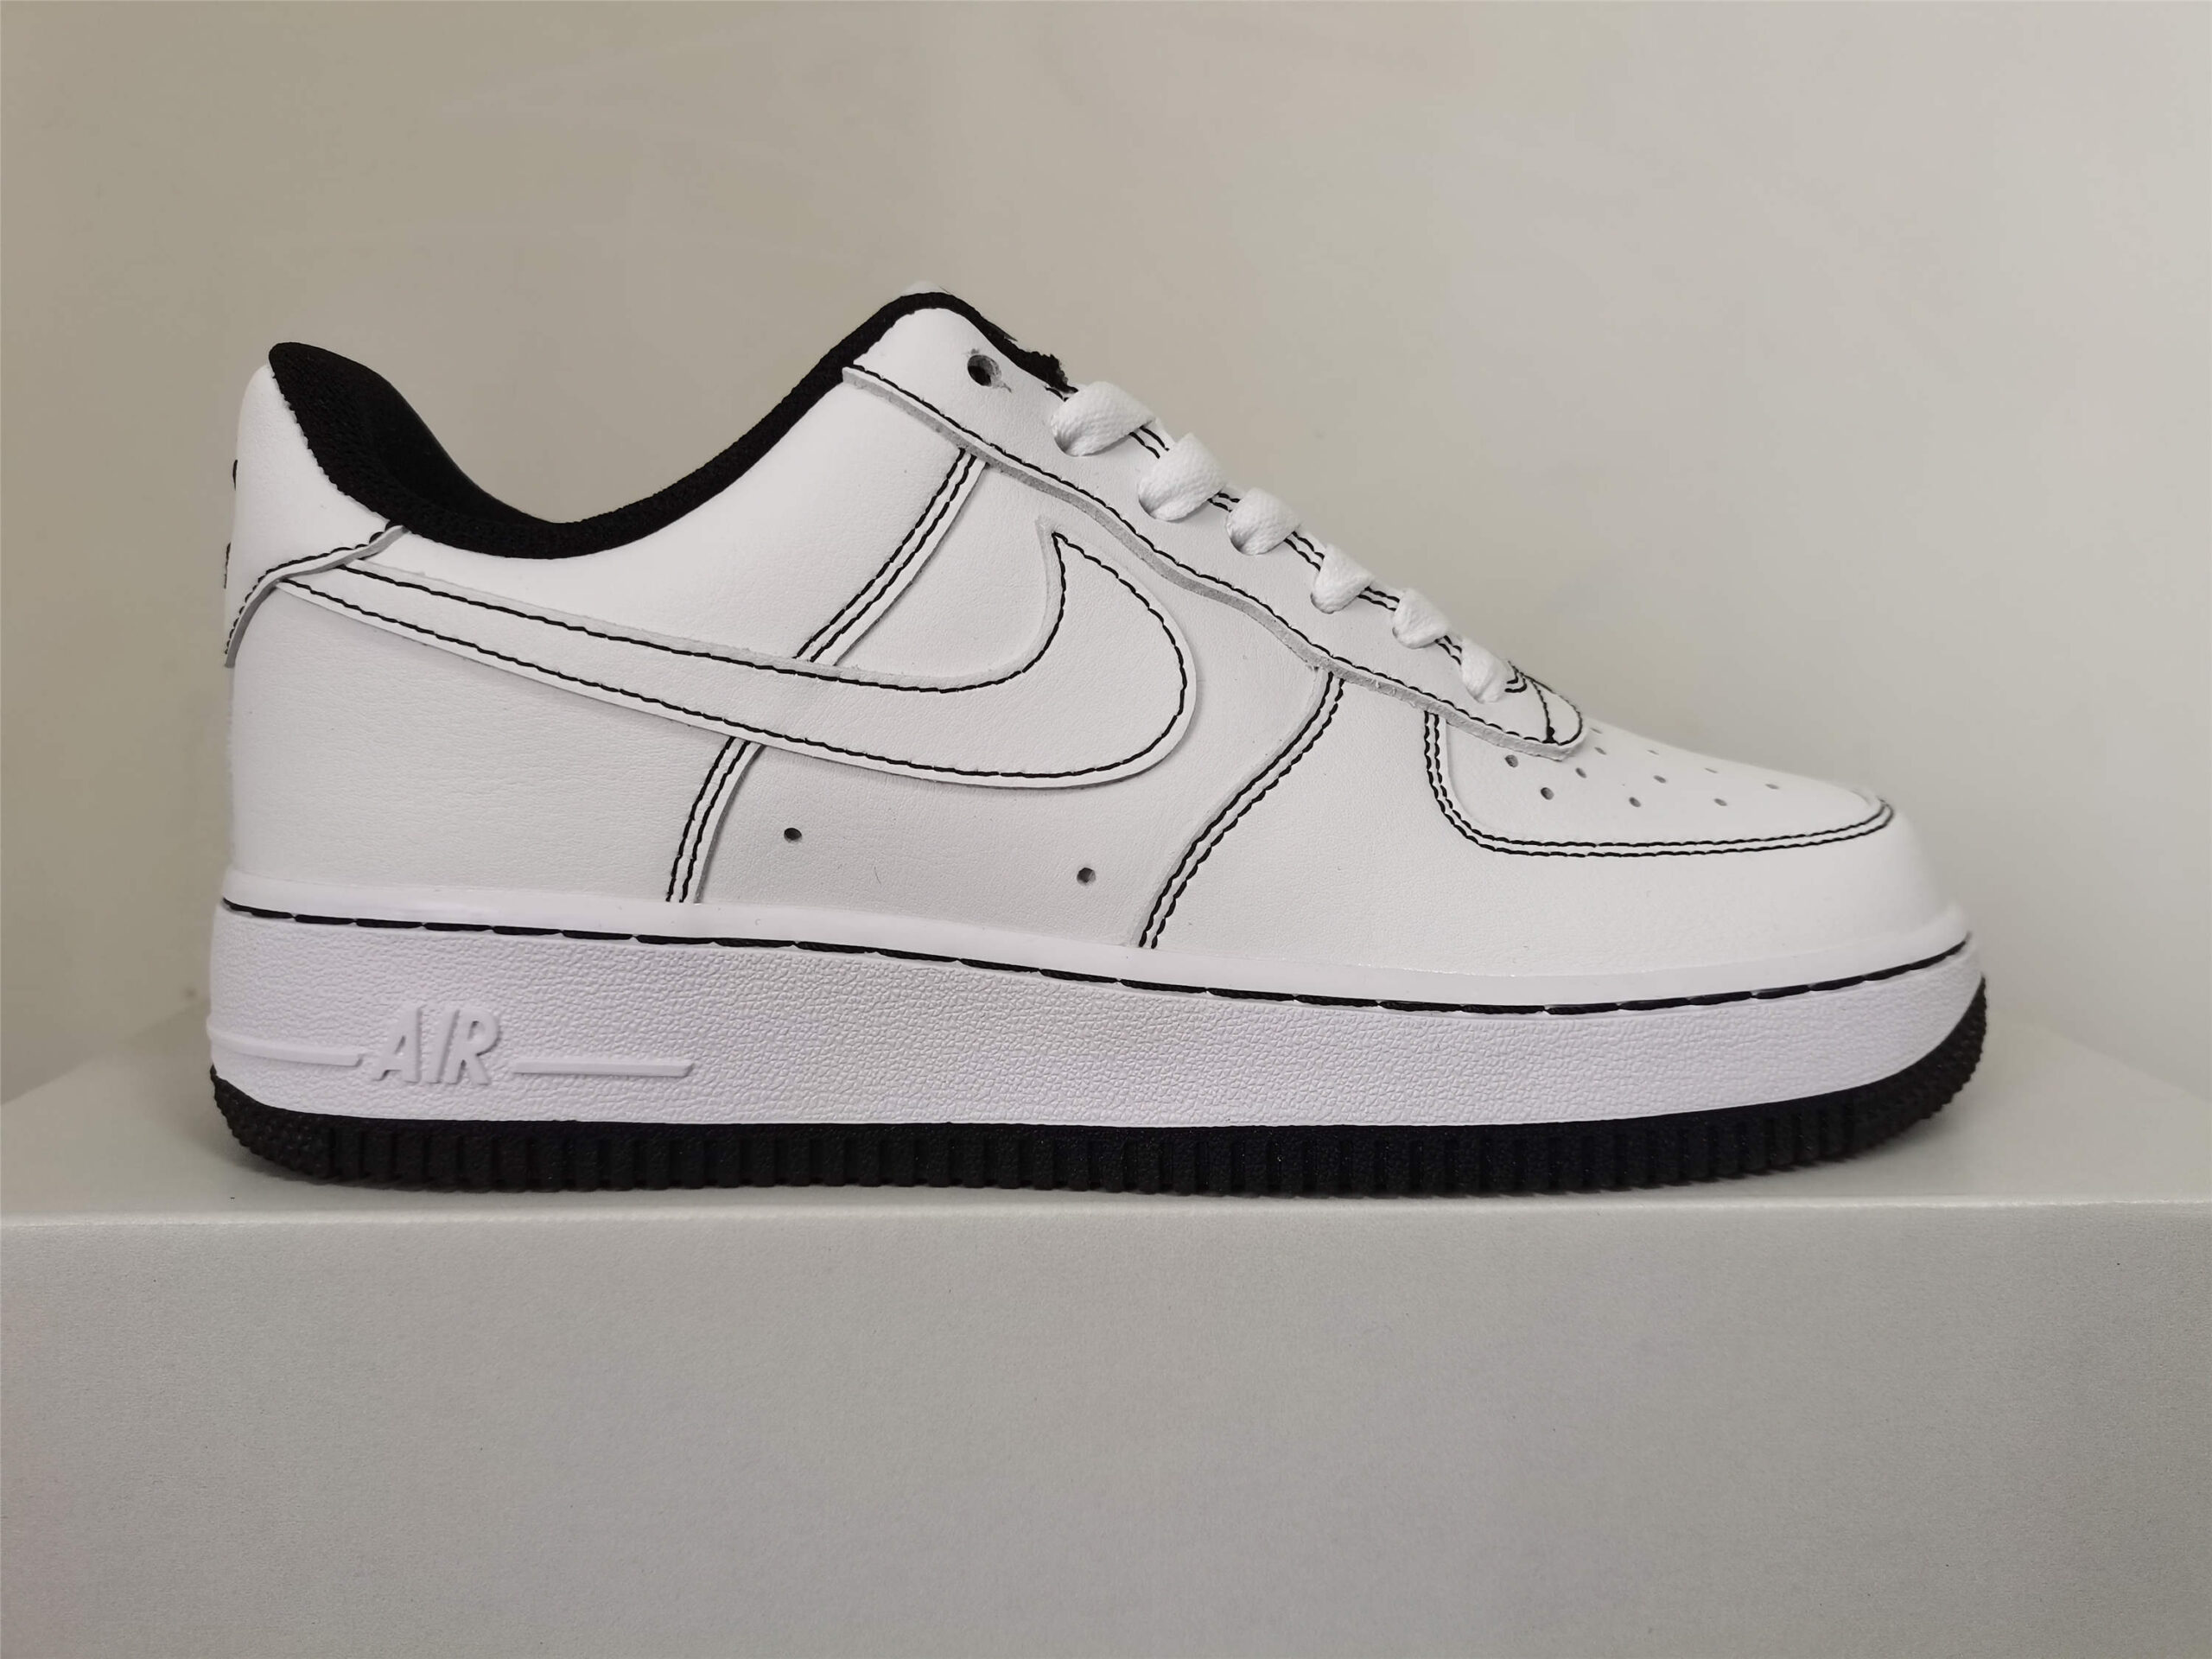 NIKE AIR FORCE 1 LOW CONTRAST STITCH – “WHITE”